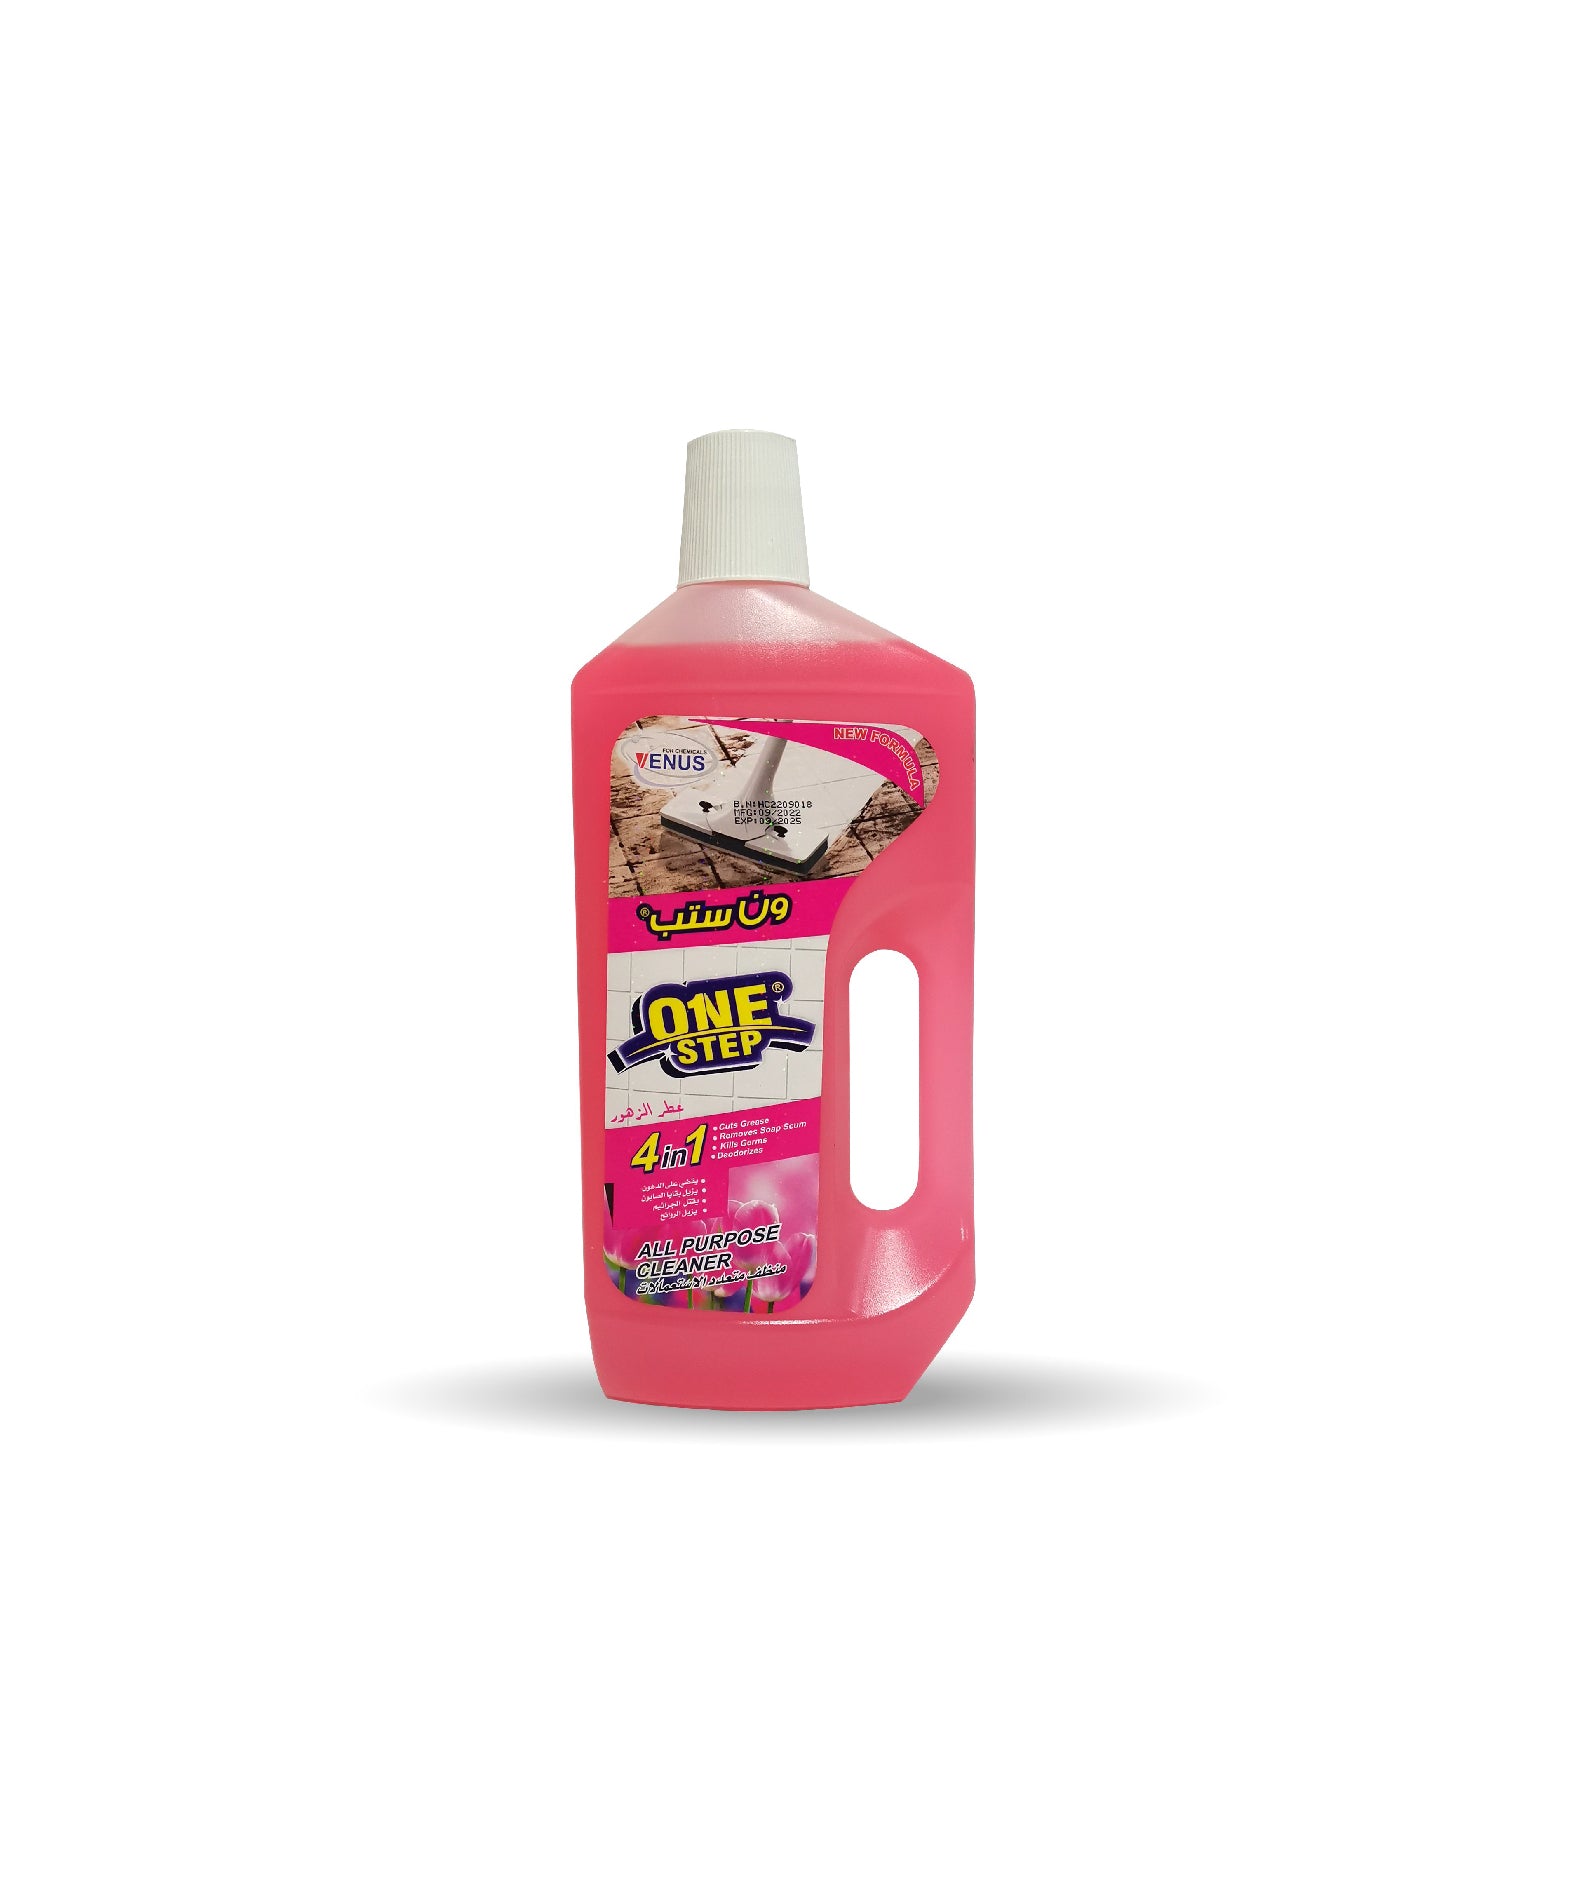 One Step All-Purpose Cleaner 4*1 - Flowers Fragrance, 1 Liter